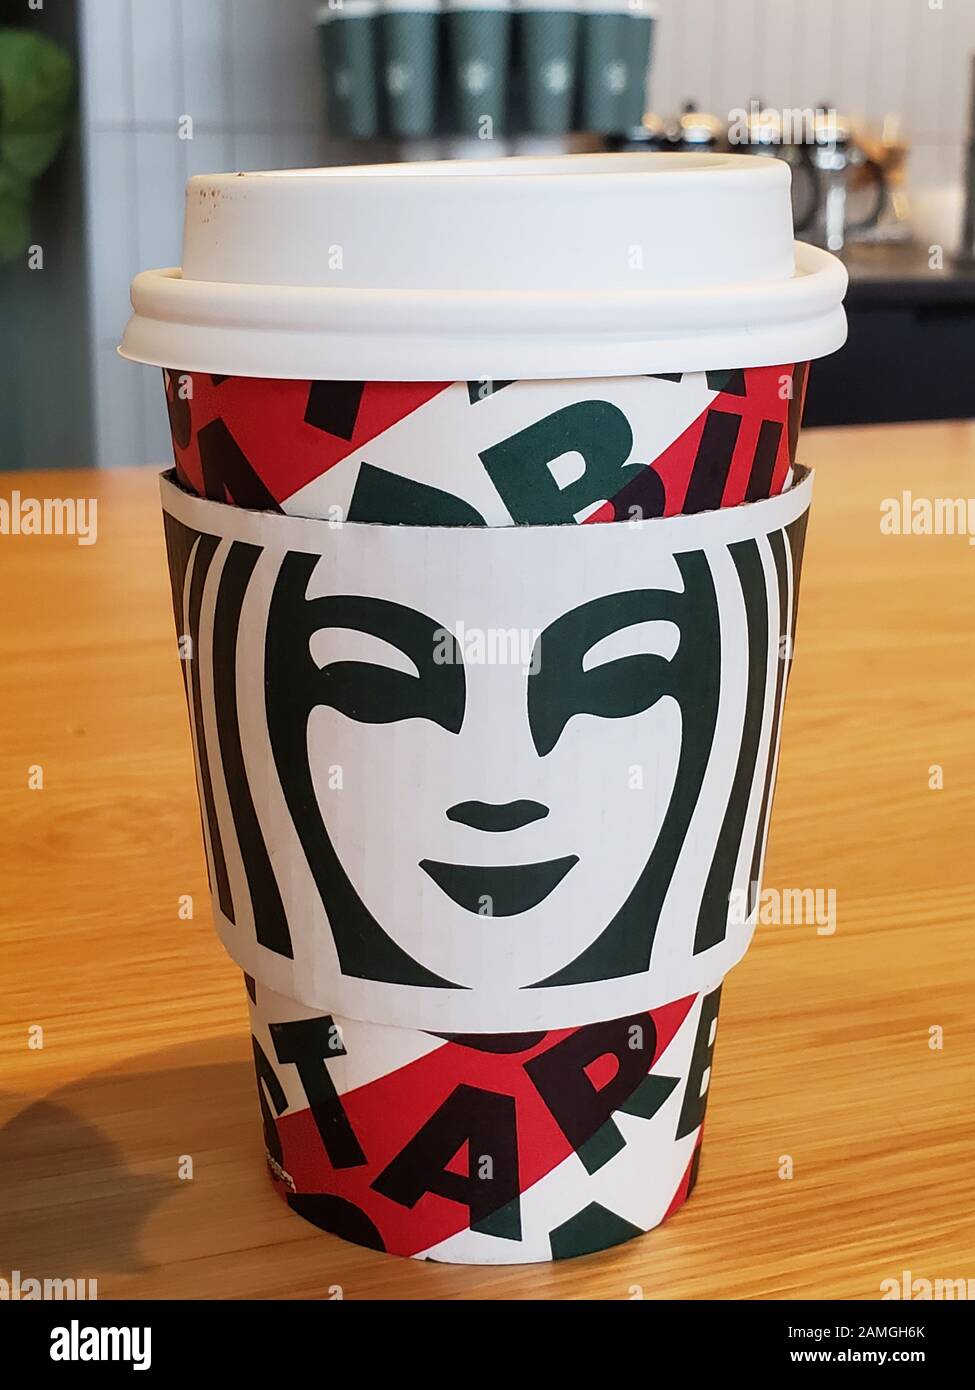 https://c8.alamy.com/comp/2AMGH6K/close-up-of-2019-holiday-cup-design-at-starbucks-coffee-cafe-in-san-ramon-california-november-30-2019-starbucks-cups-have-provoked-controversy-over-their-lack-of-religious-holiday-symbolism-2AMGH6K.jpg